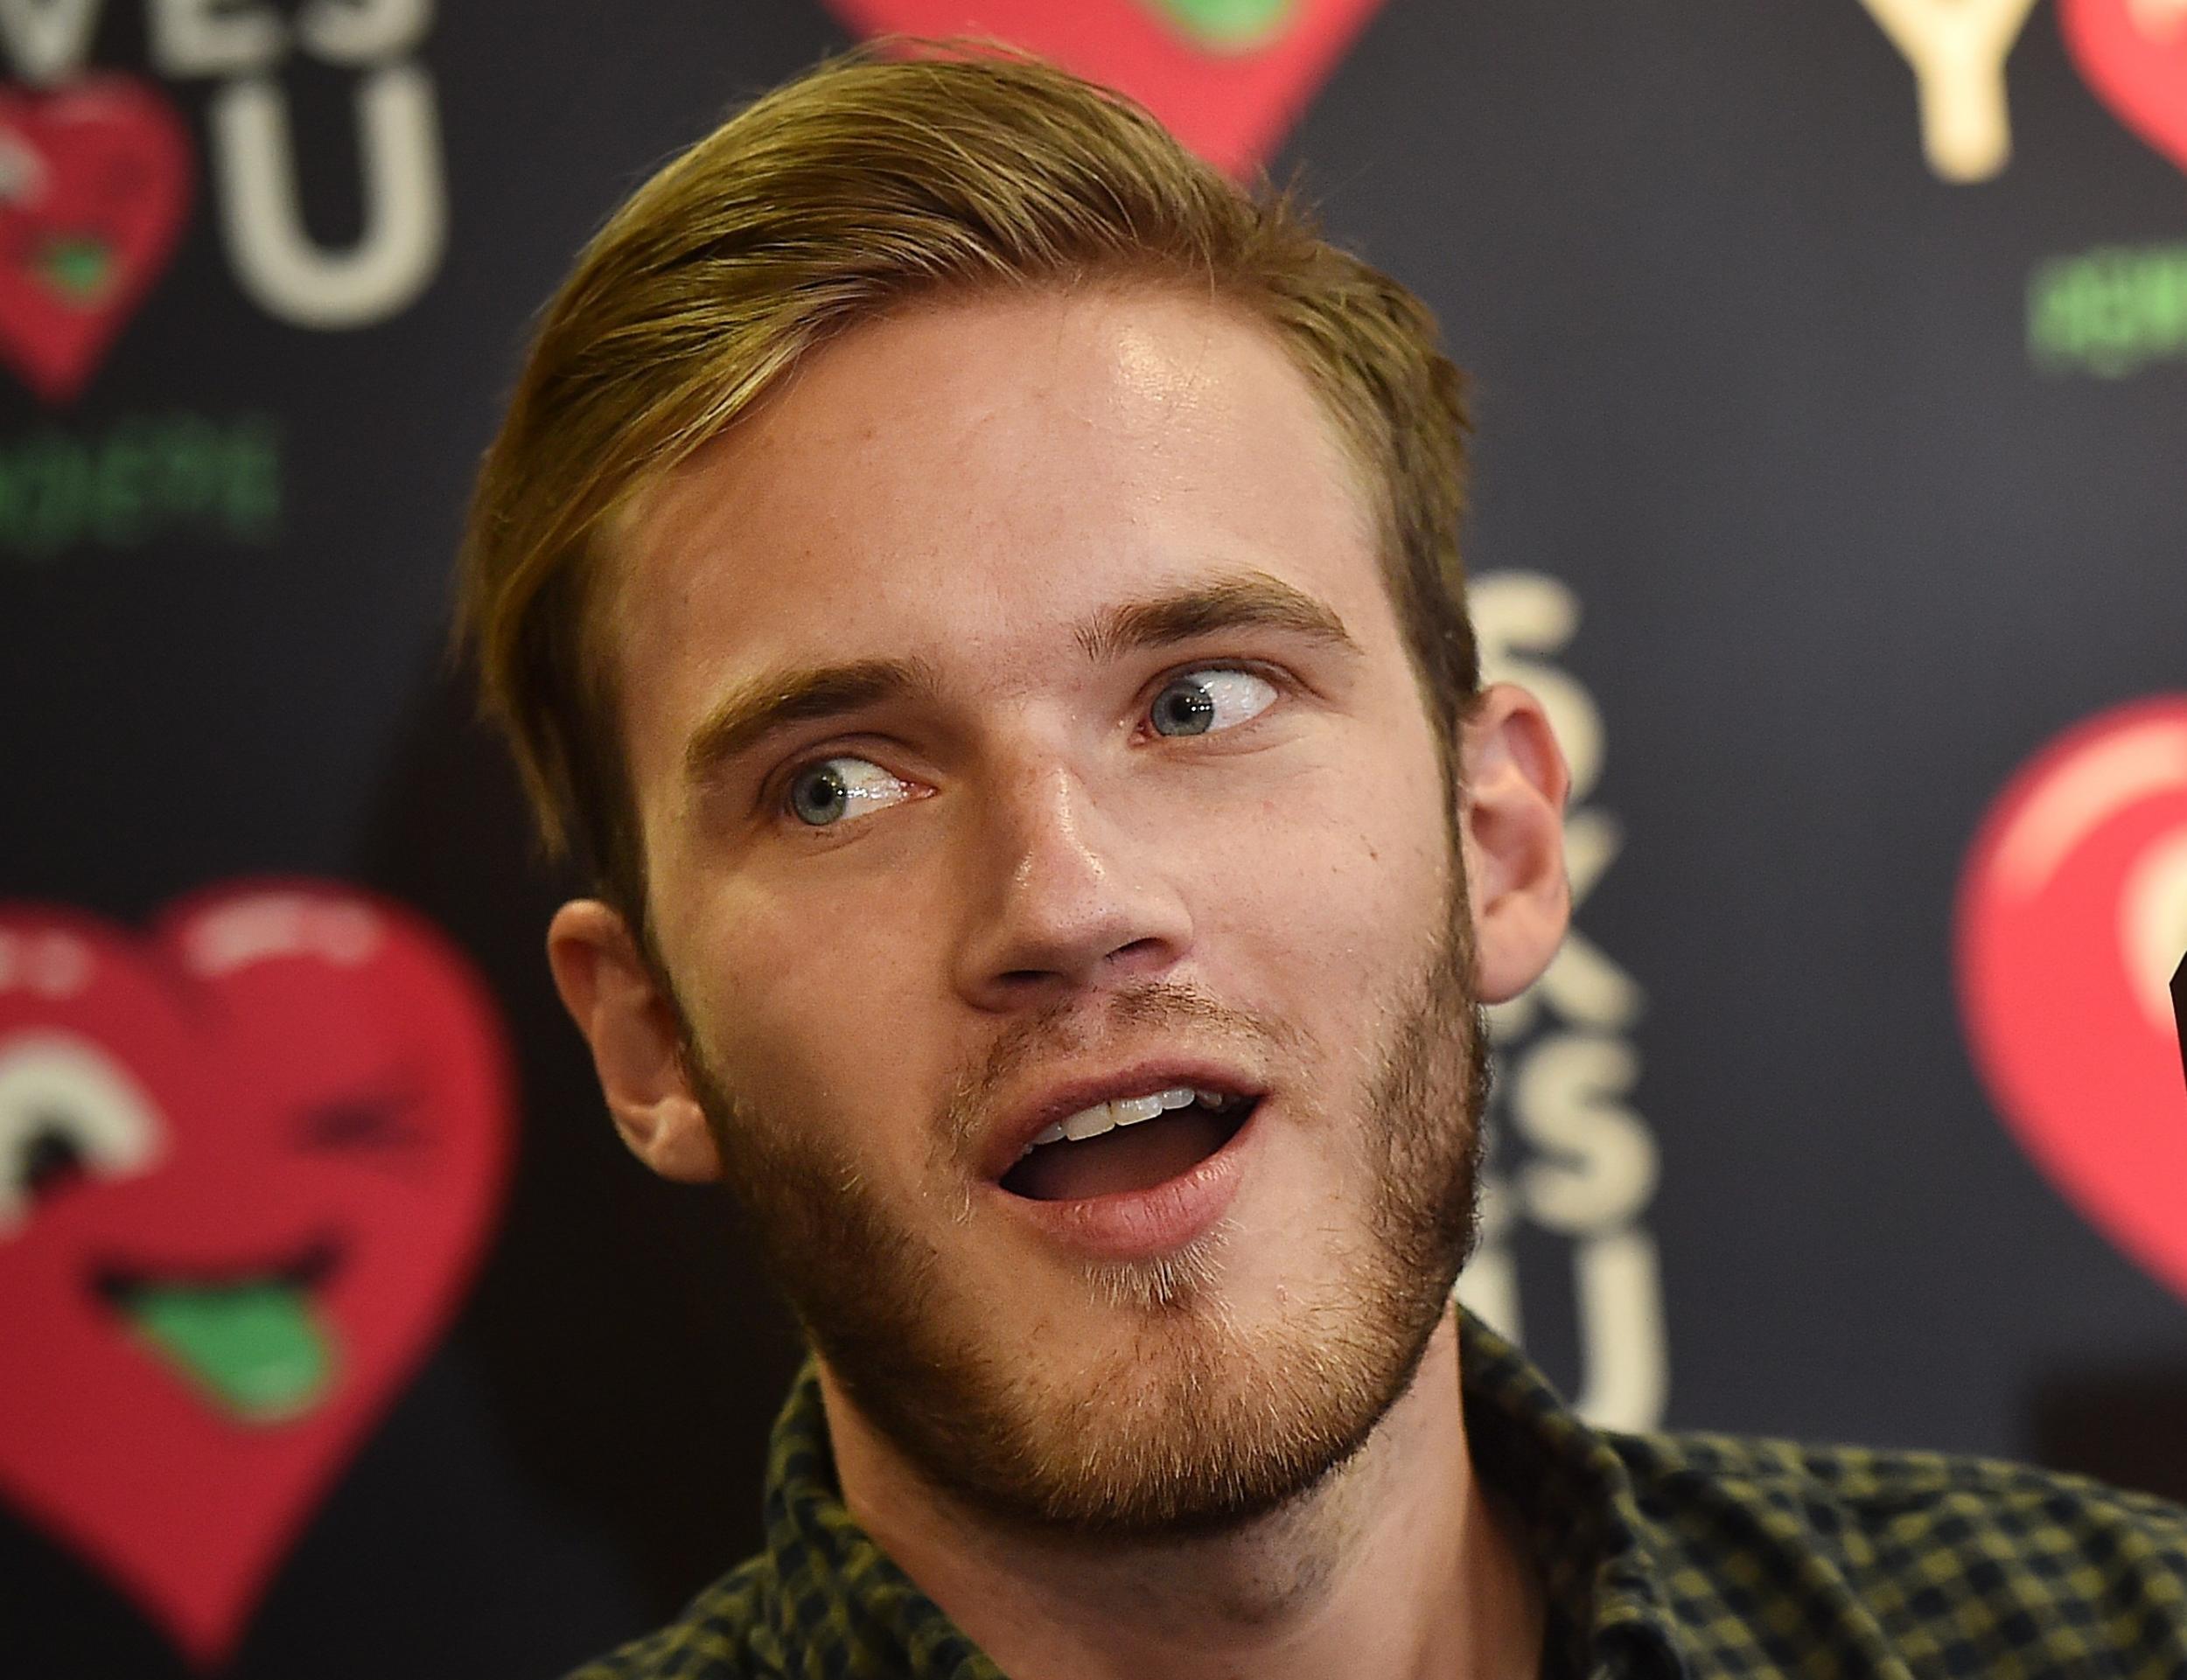 Pewdiepie Vs T Series Fans Hire Billboards In Desperate Bid To Keep - pewdiepie vs t series fans hire billboards in desperate bid to keep channel most popular on youtube the independent